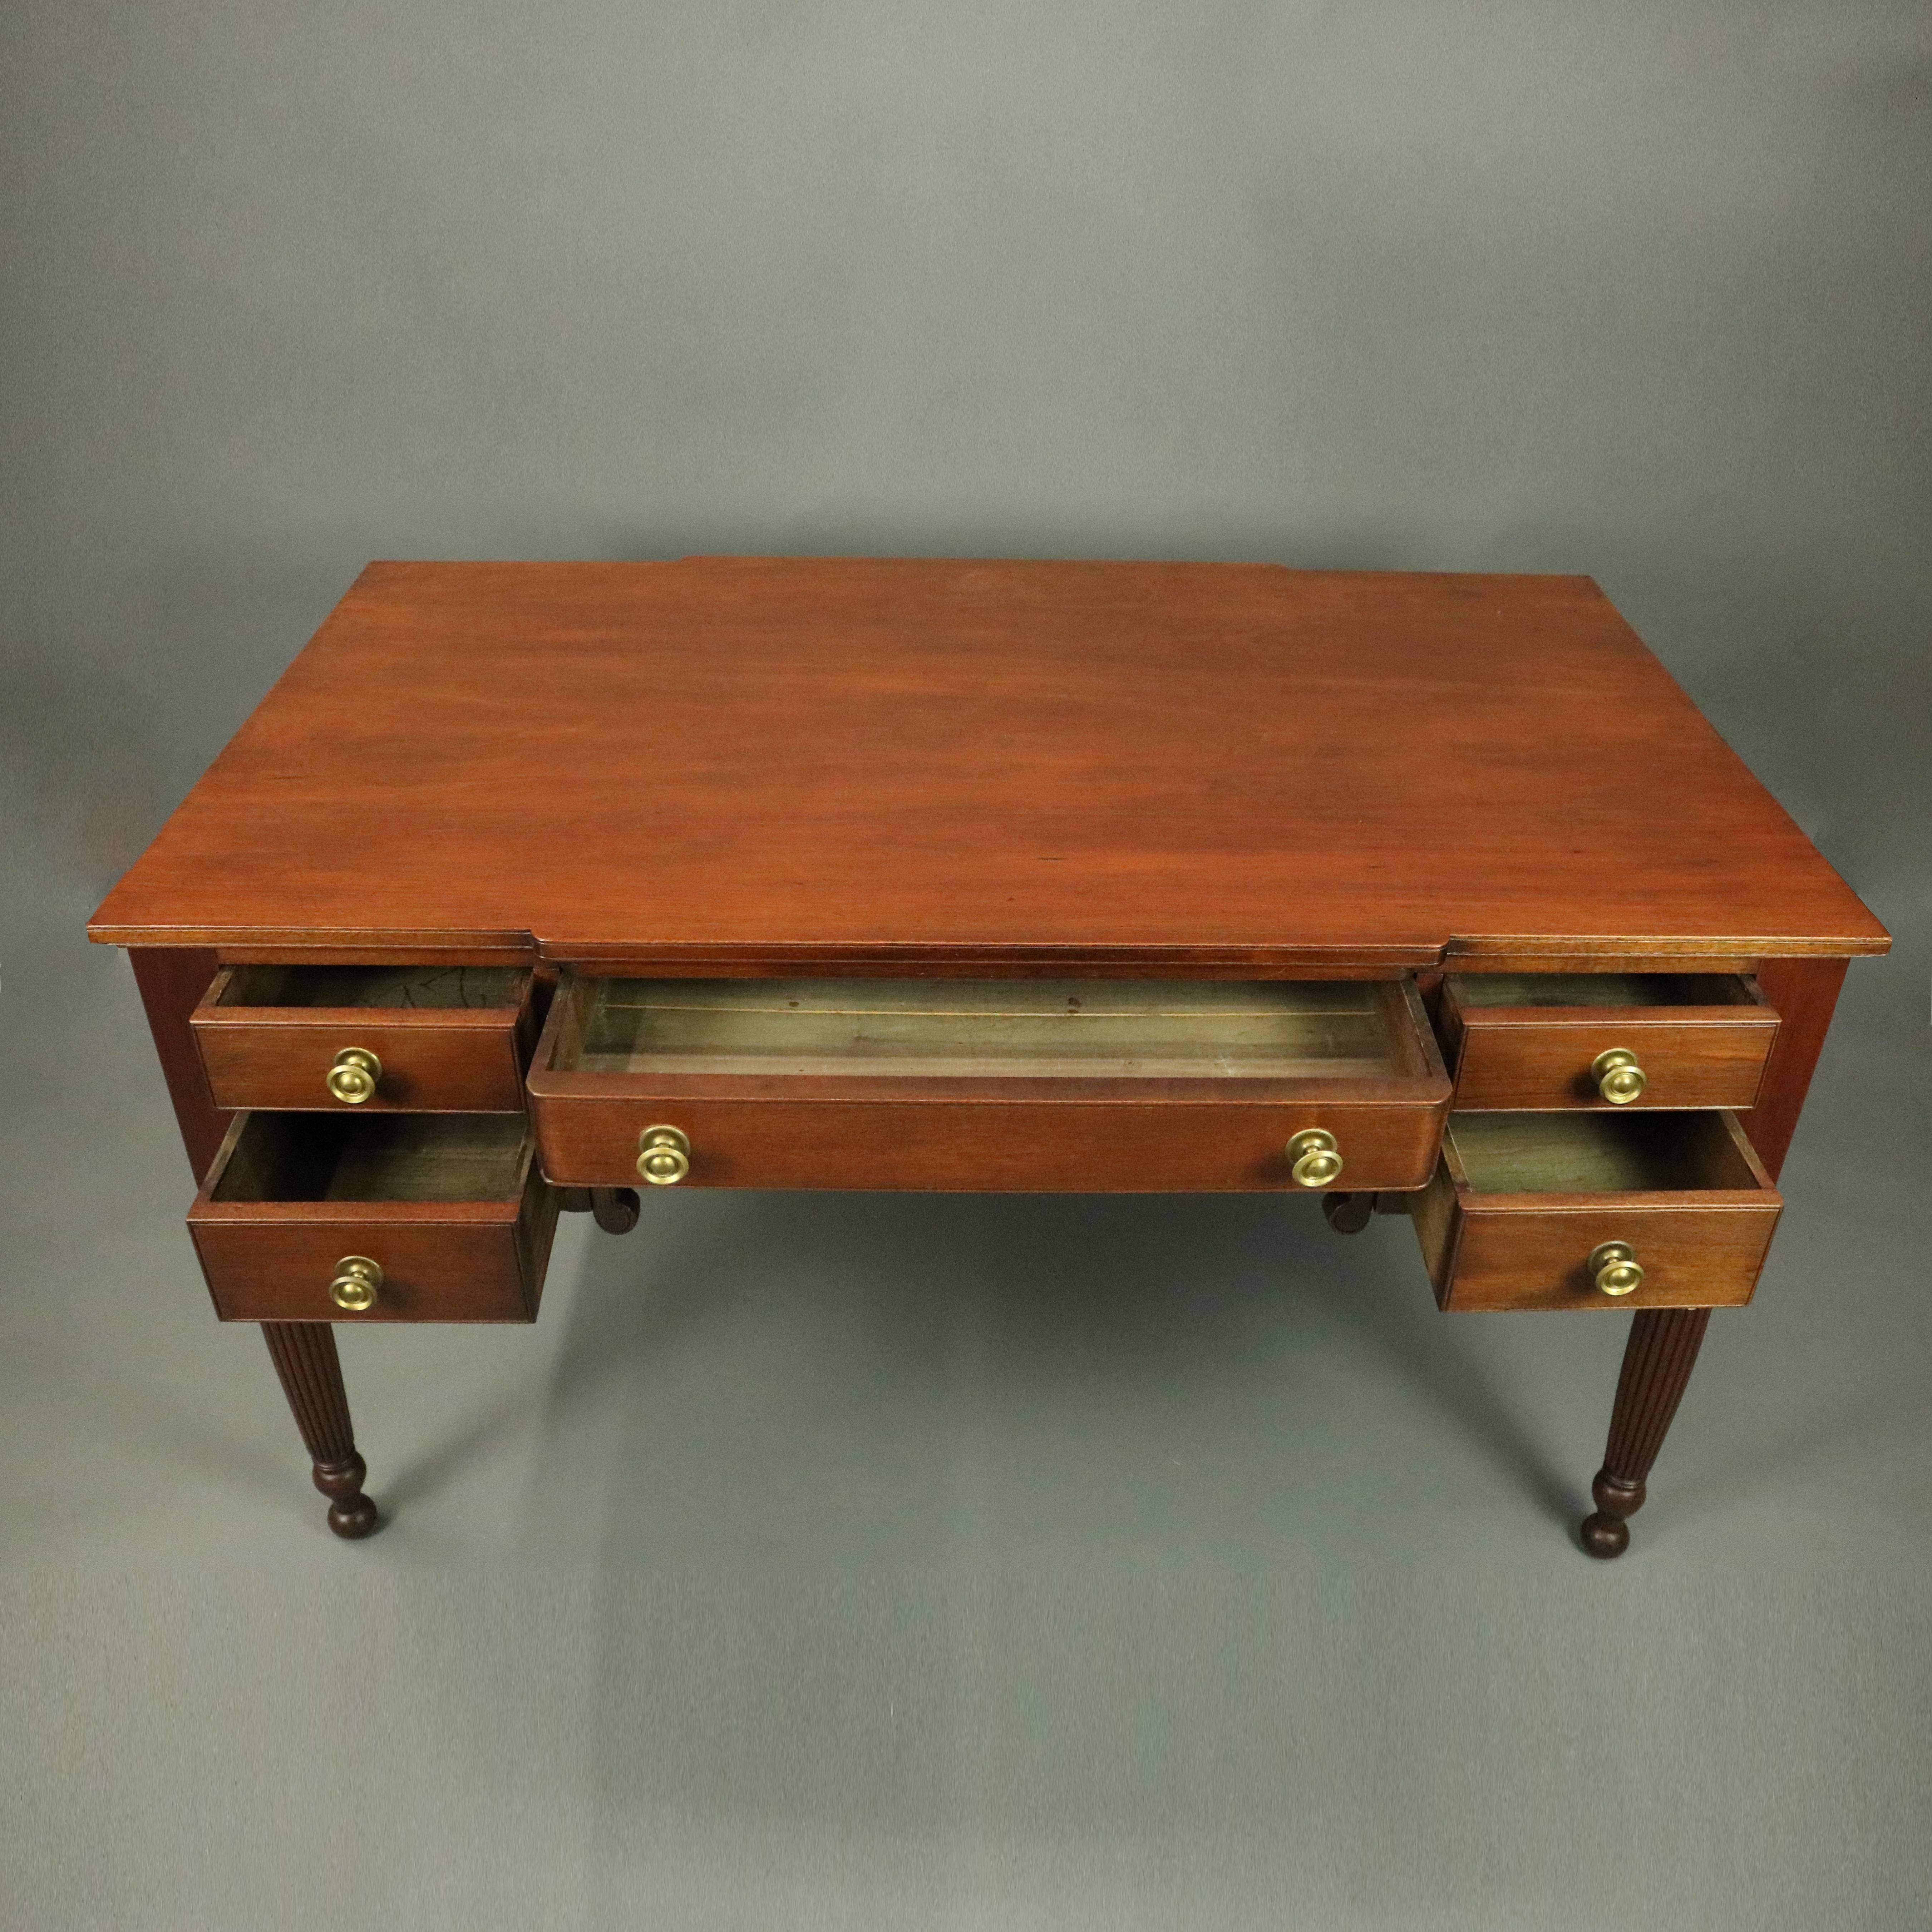 Antique English Sheraton mahogany partners desk features turned and reeded legs below case, each side with one central drawer flanked by two side drawers, bronze hardware throughout, circa 1820

Measures: 30.5" H x 55.5" W x 32.25"